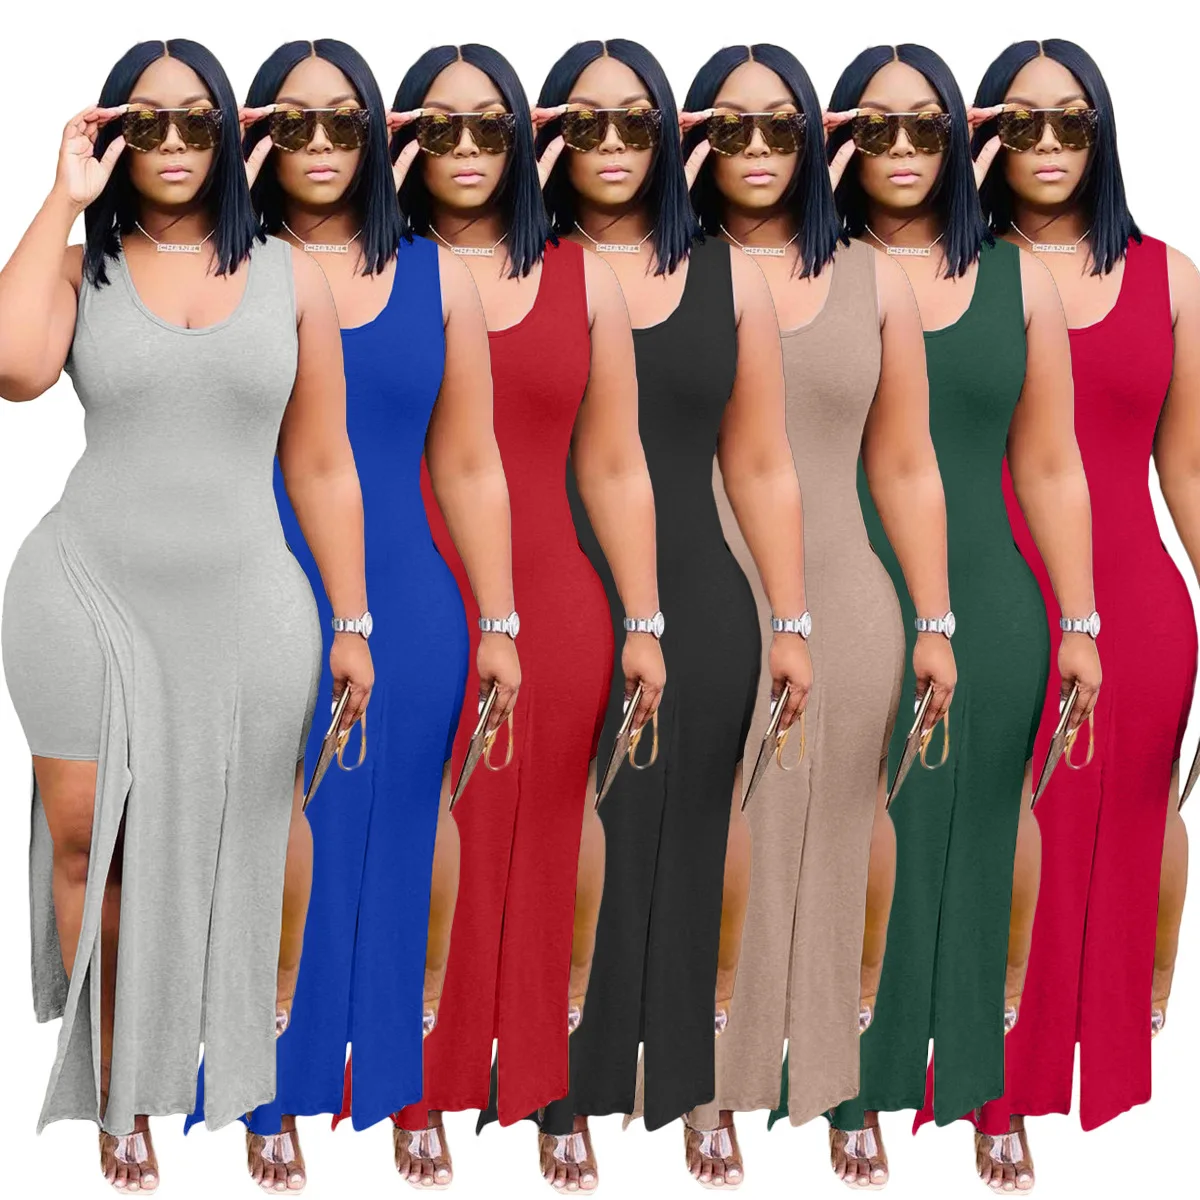 

Cotton Blend High Slit Irregular Long Tops Casual Shorts Sets Plus Size Women Clothing Lounge Wear Two Piece Set Dropshipping, Red, gray, black, blue,army green ,apricot